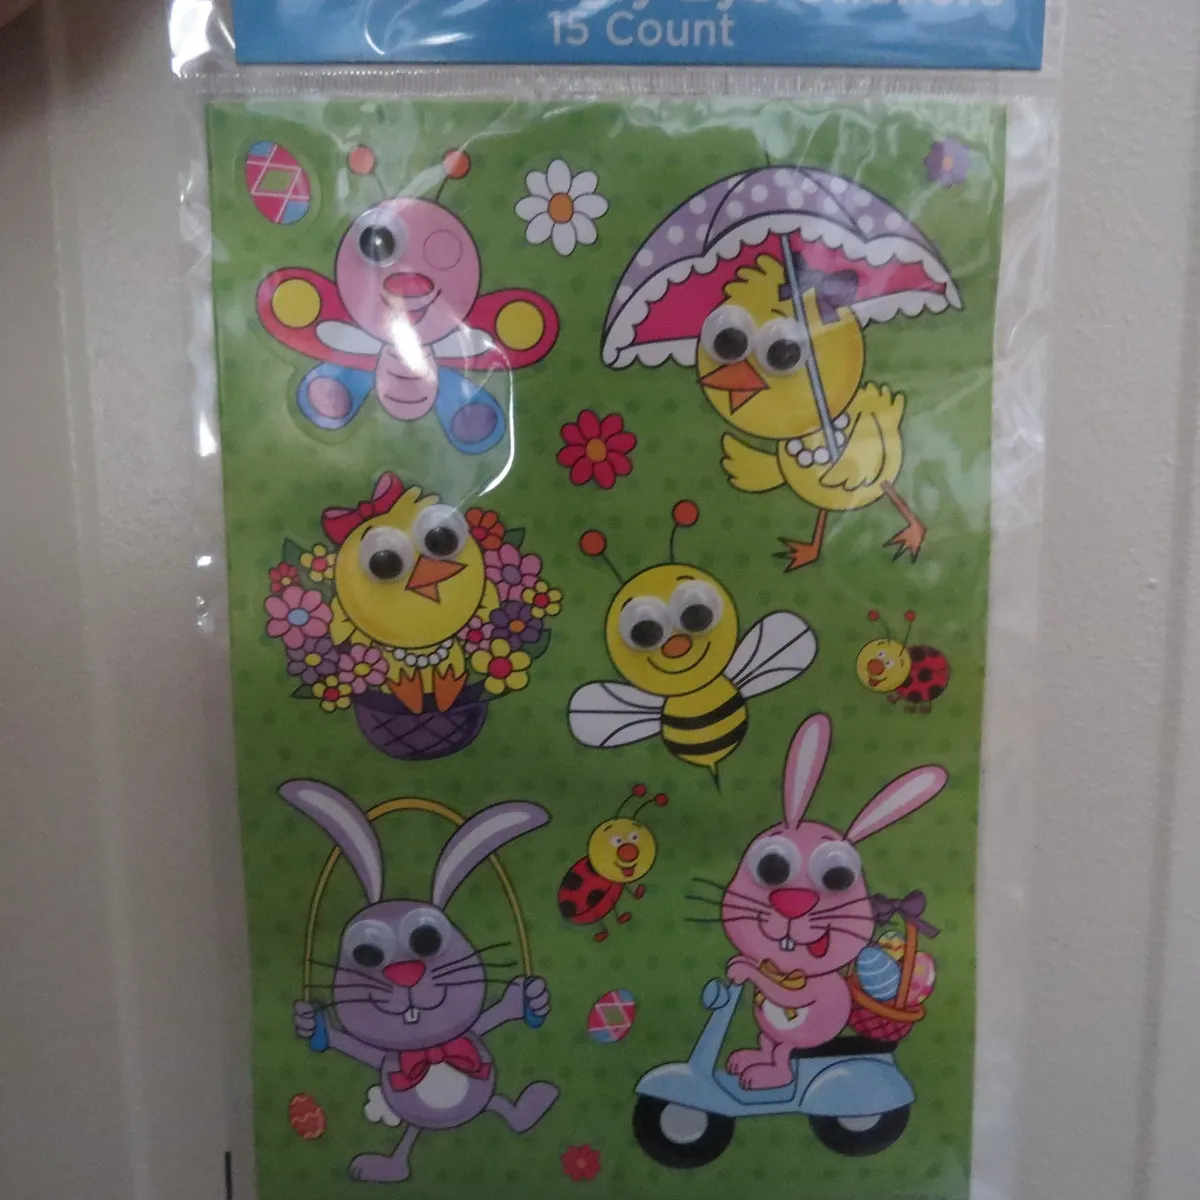 Easter Googly Eye Stickers - 15 Count - Bunny/Bee - One Eye Missing